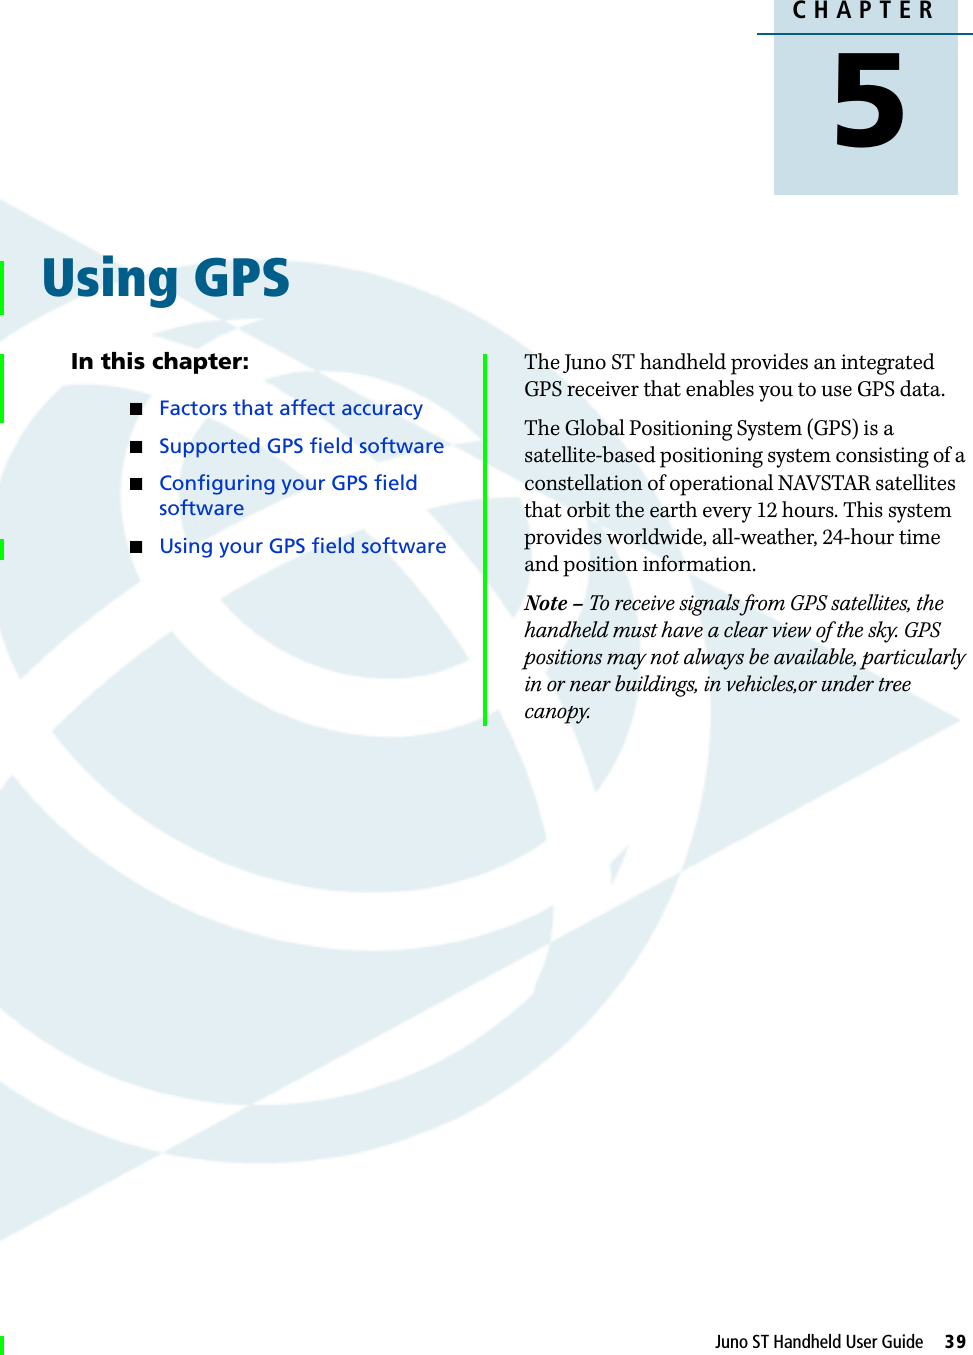 DraftCHAPTER5Juno ST Handheld User Guide     39Using GPS 5In this chapter:QFactors that affect accuracyQSupported GPS field softwareQConfiguring your GPS field softwareQUsing your GPS field softwareThe Juno ST handheld provides an integrated GPS receiver that enables you to use GPS data.The Global Positioning System (GPS) is a satellite-based positioning system consisting of a constellation of operational NAVSTAR satellites that orbit the earth every 12 hours. This system provides worldwide, all-weather, 24-hour time and position information. Note – To receive signals from GPS satellites, the handheld must have a clear view of the sky. GPS positions may not always be available, particularly in or near buildings, in vehicles,or under tree canopy.